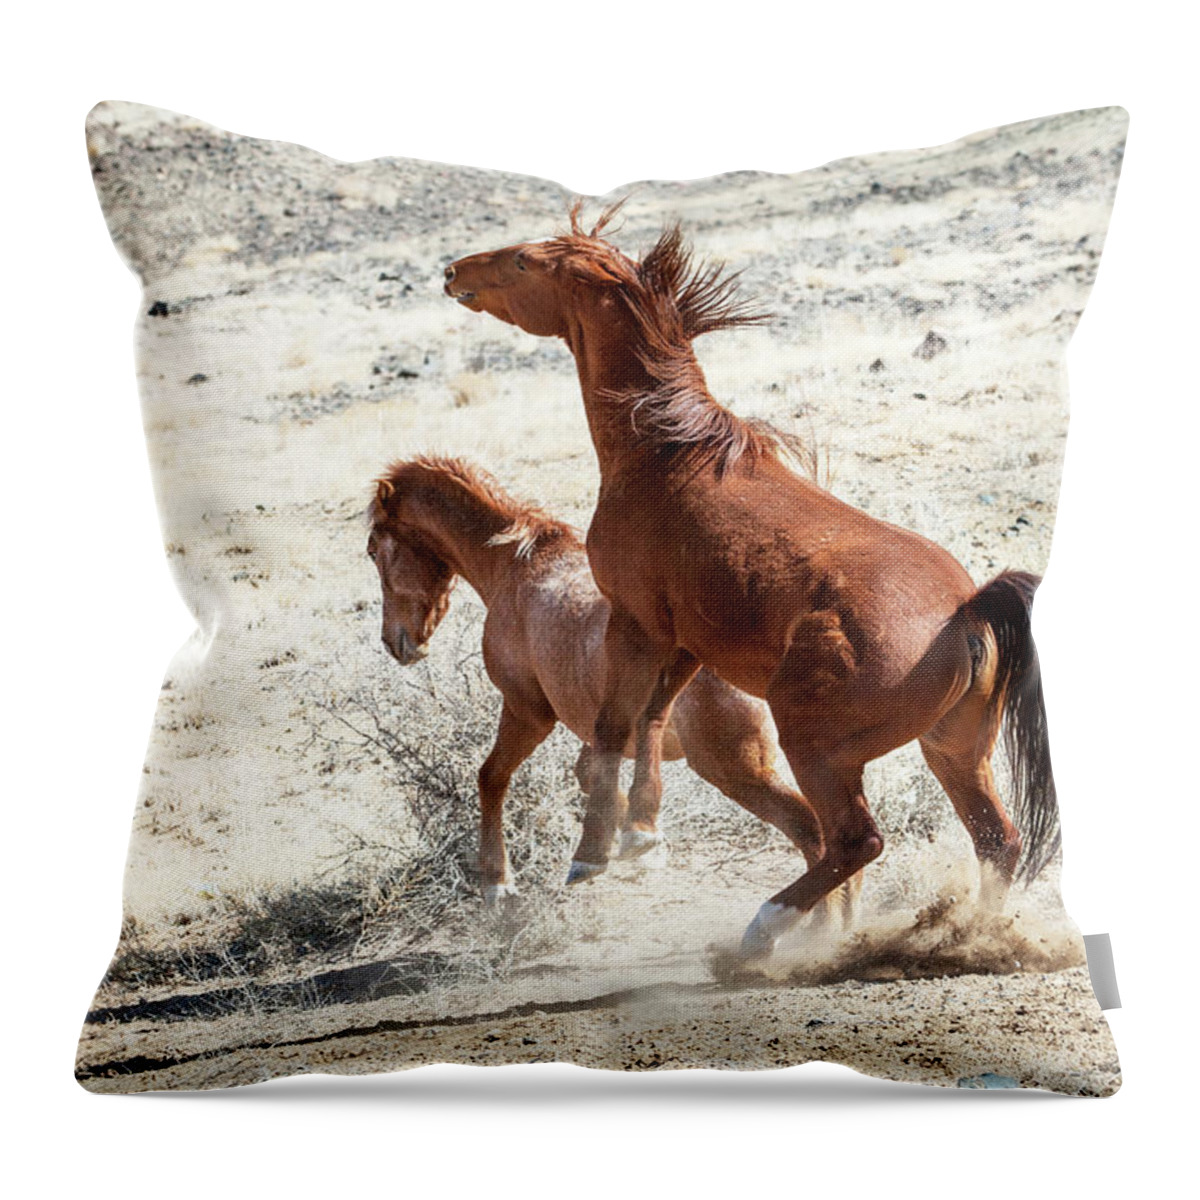 Wild Horses Throw Pillow featuring the photograph Wild Horses Couple #2 by Catherine Lau